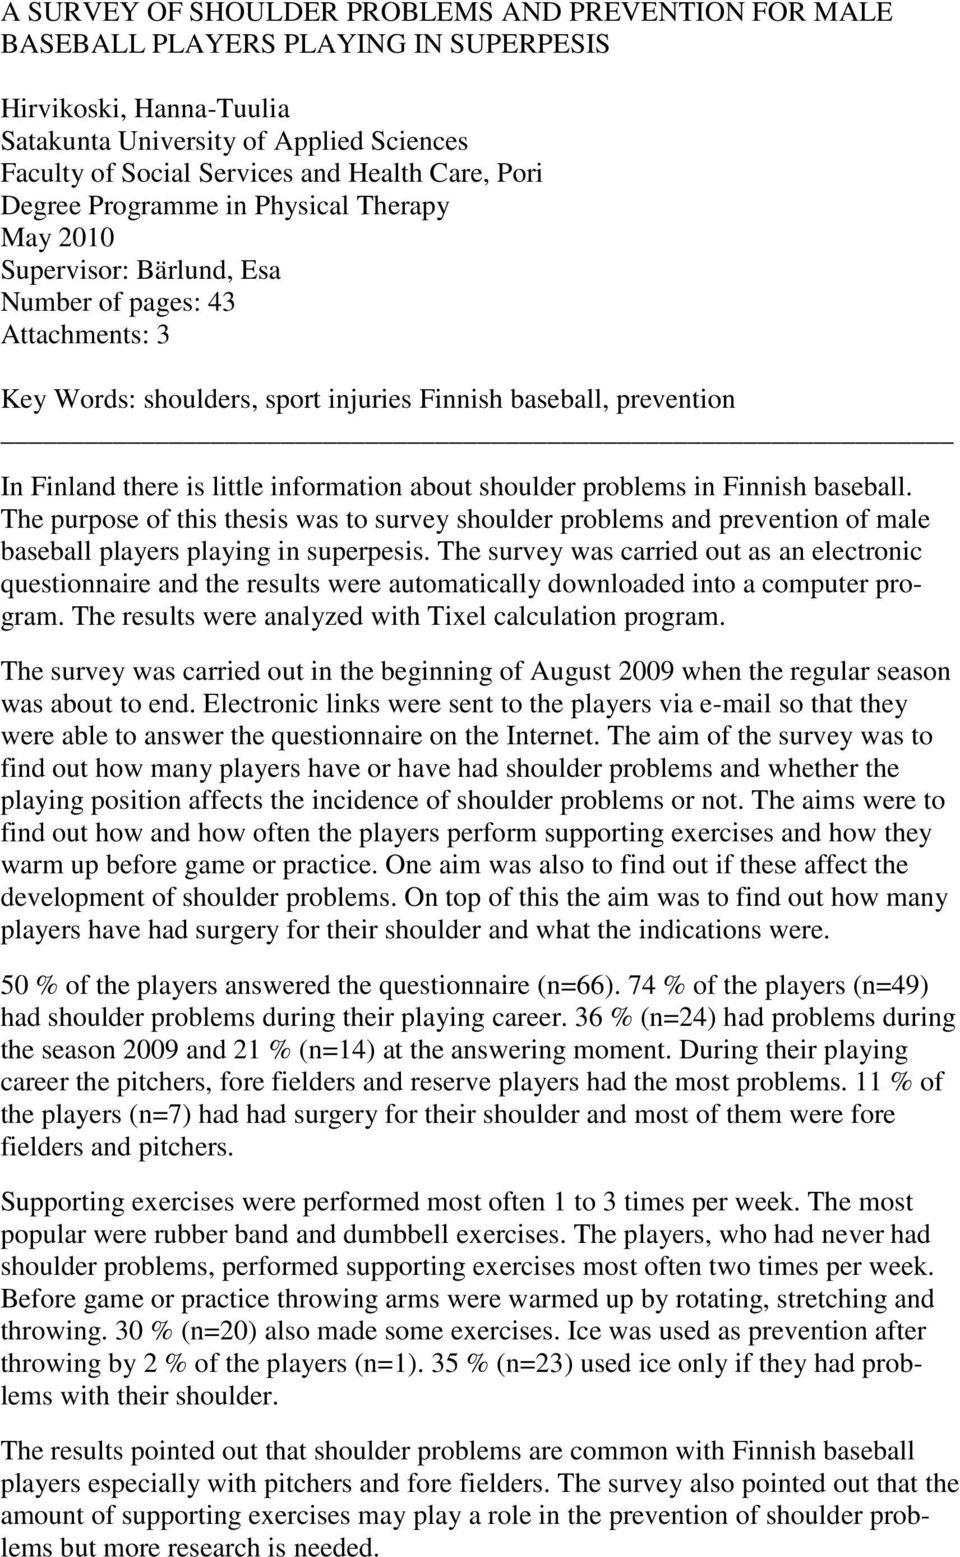 is little information about shoulder problems in Finnish baseball. The purpose of this thesis was to survey shoulder problems and prevention of male baseball players playing in superpesis.